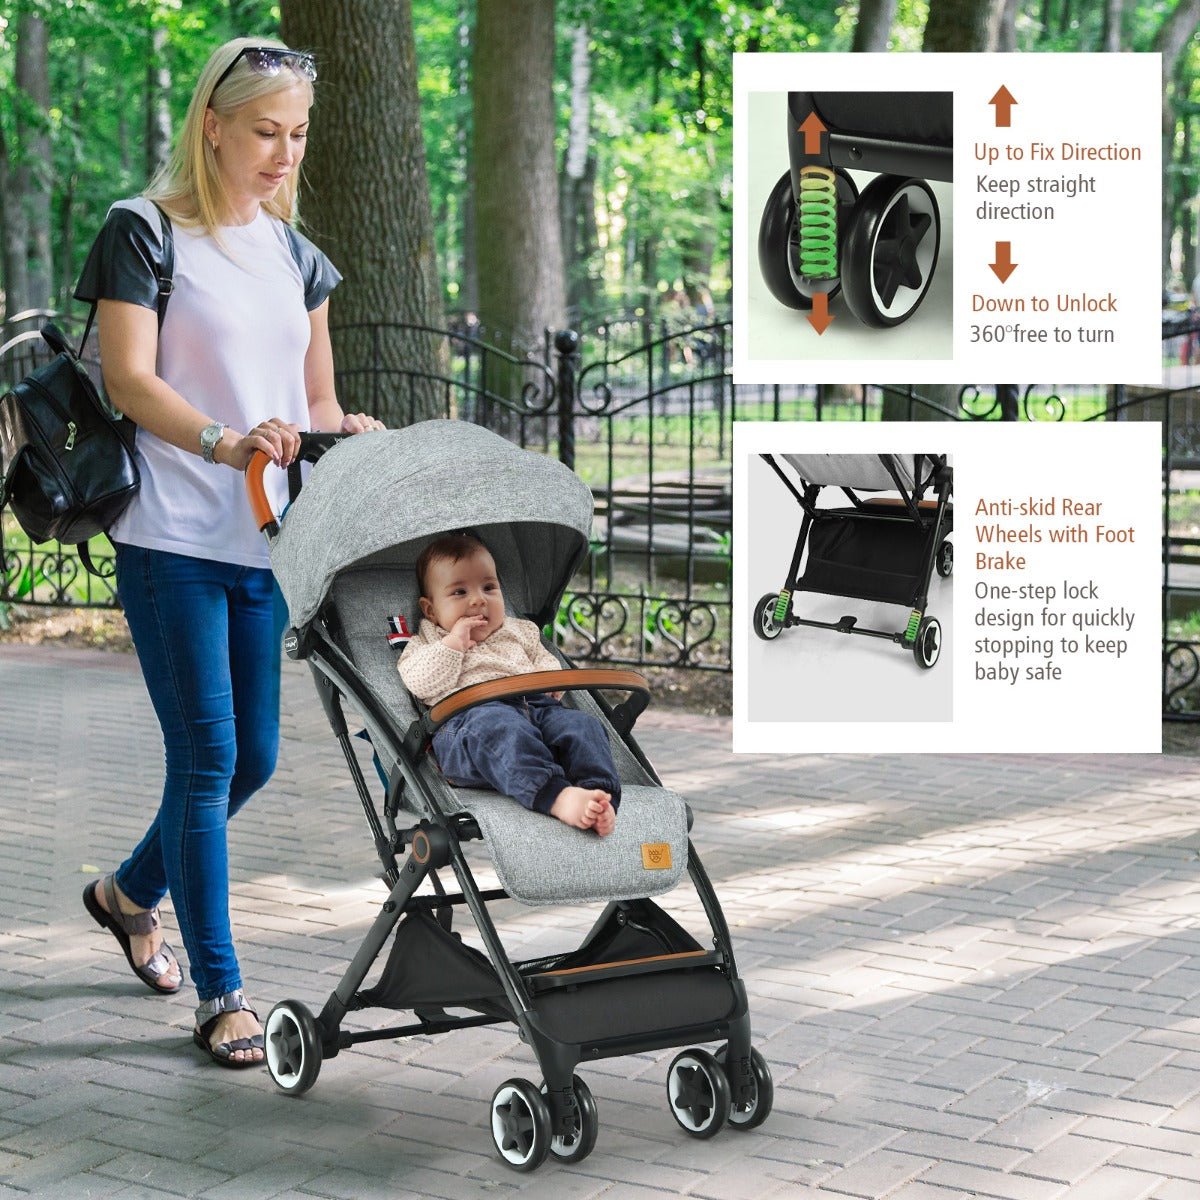 Stylish Grey Stroller with Adjustable Seating